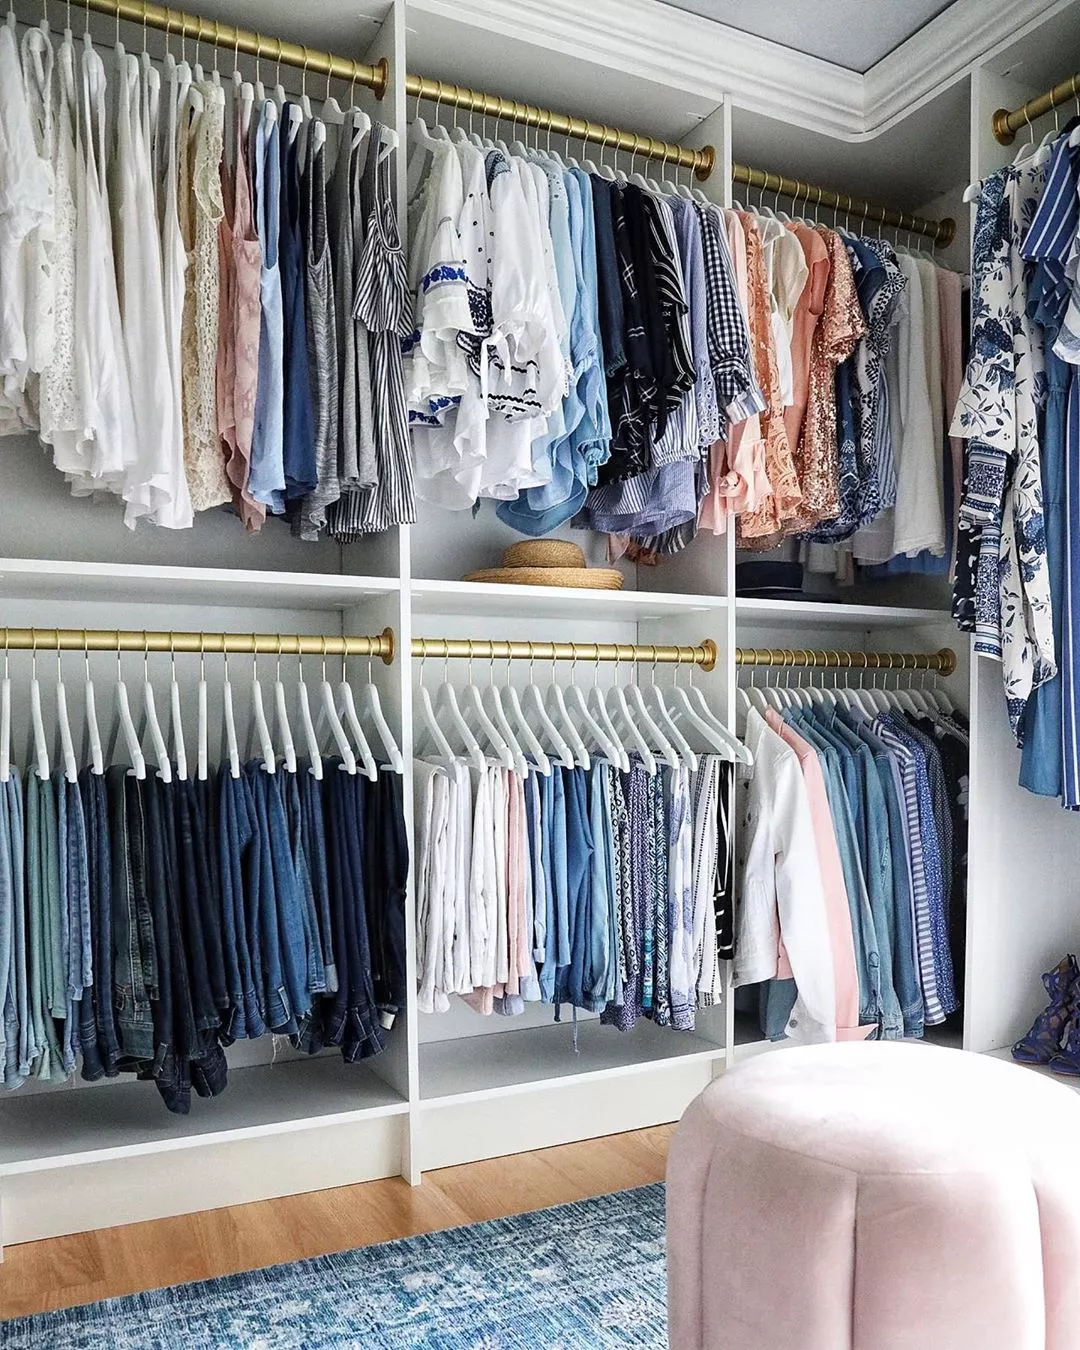 How To Organize A Deep Closet With Lots Of Space